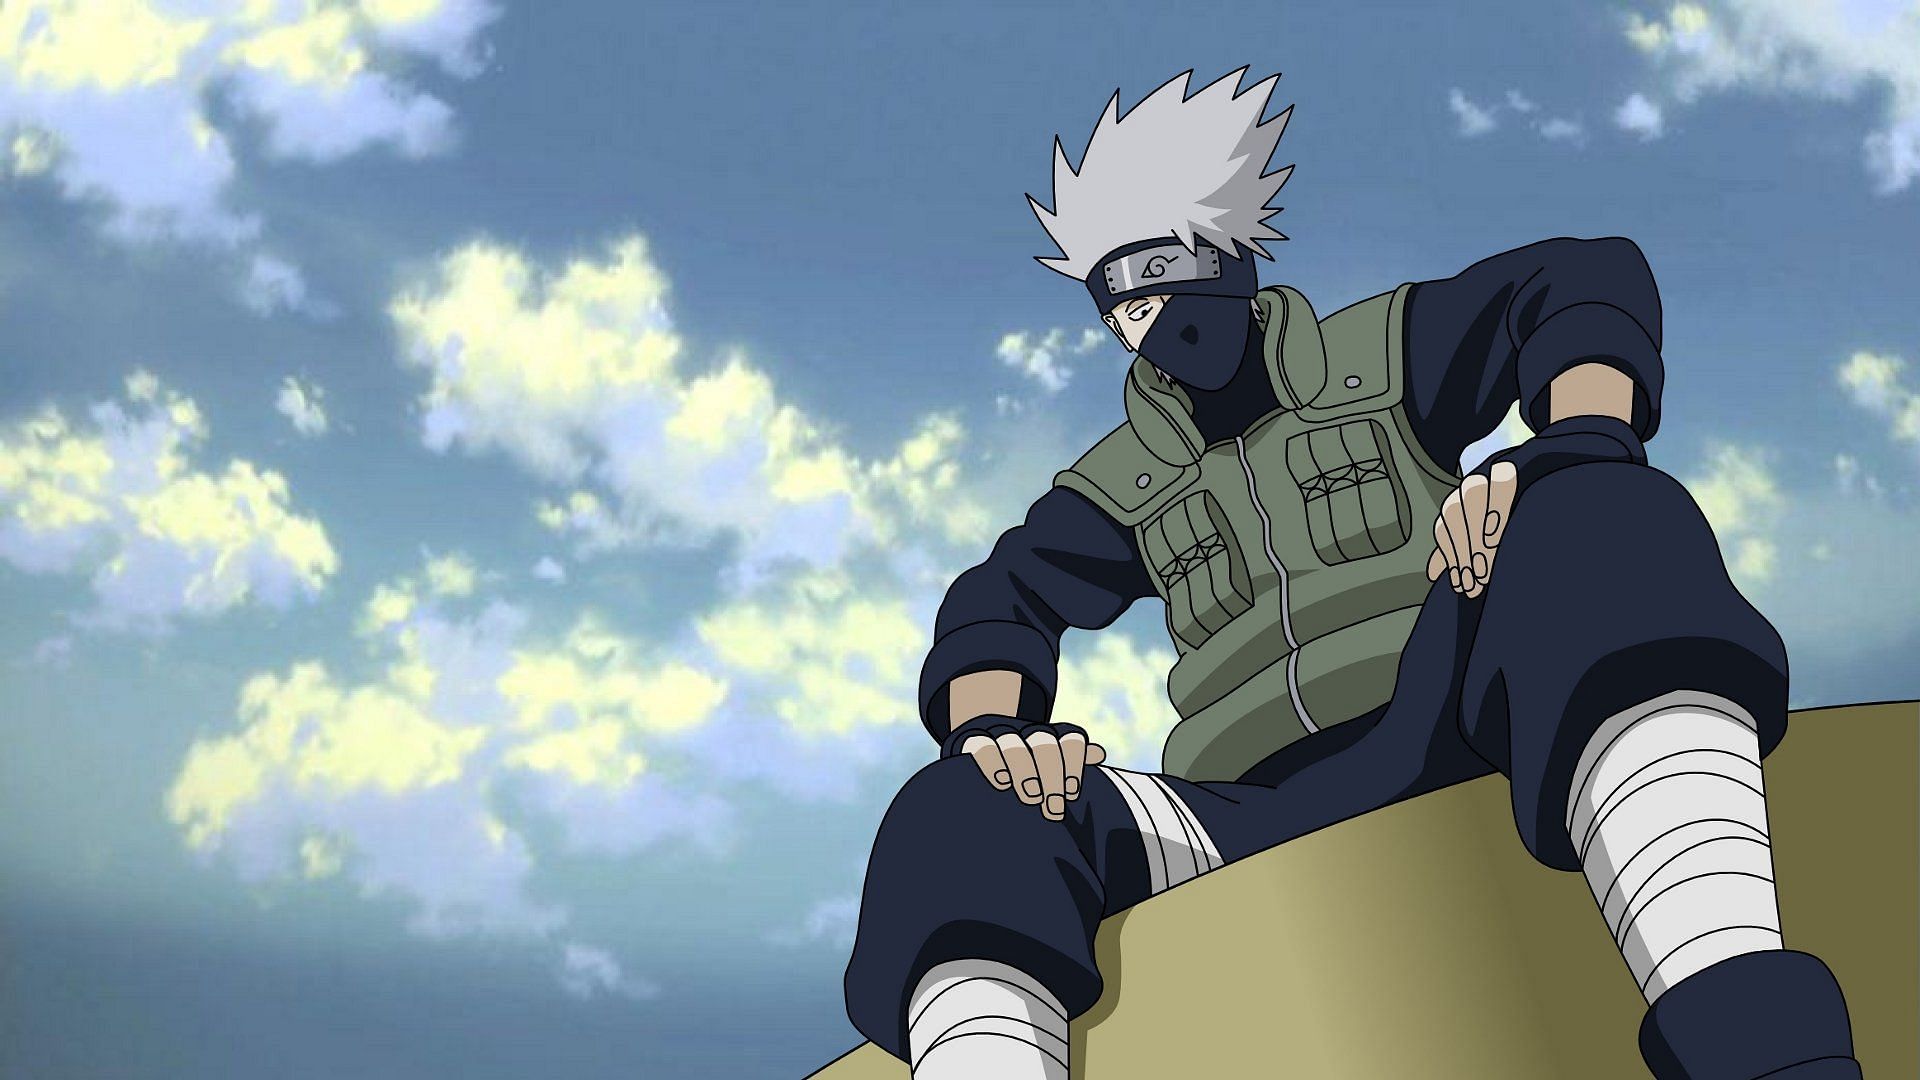 Prior to the iconic reveal, fans had driven themselves crazy wondering what Kakashi looks like without the mask (Image via TV Tokyo)